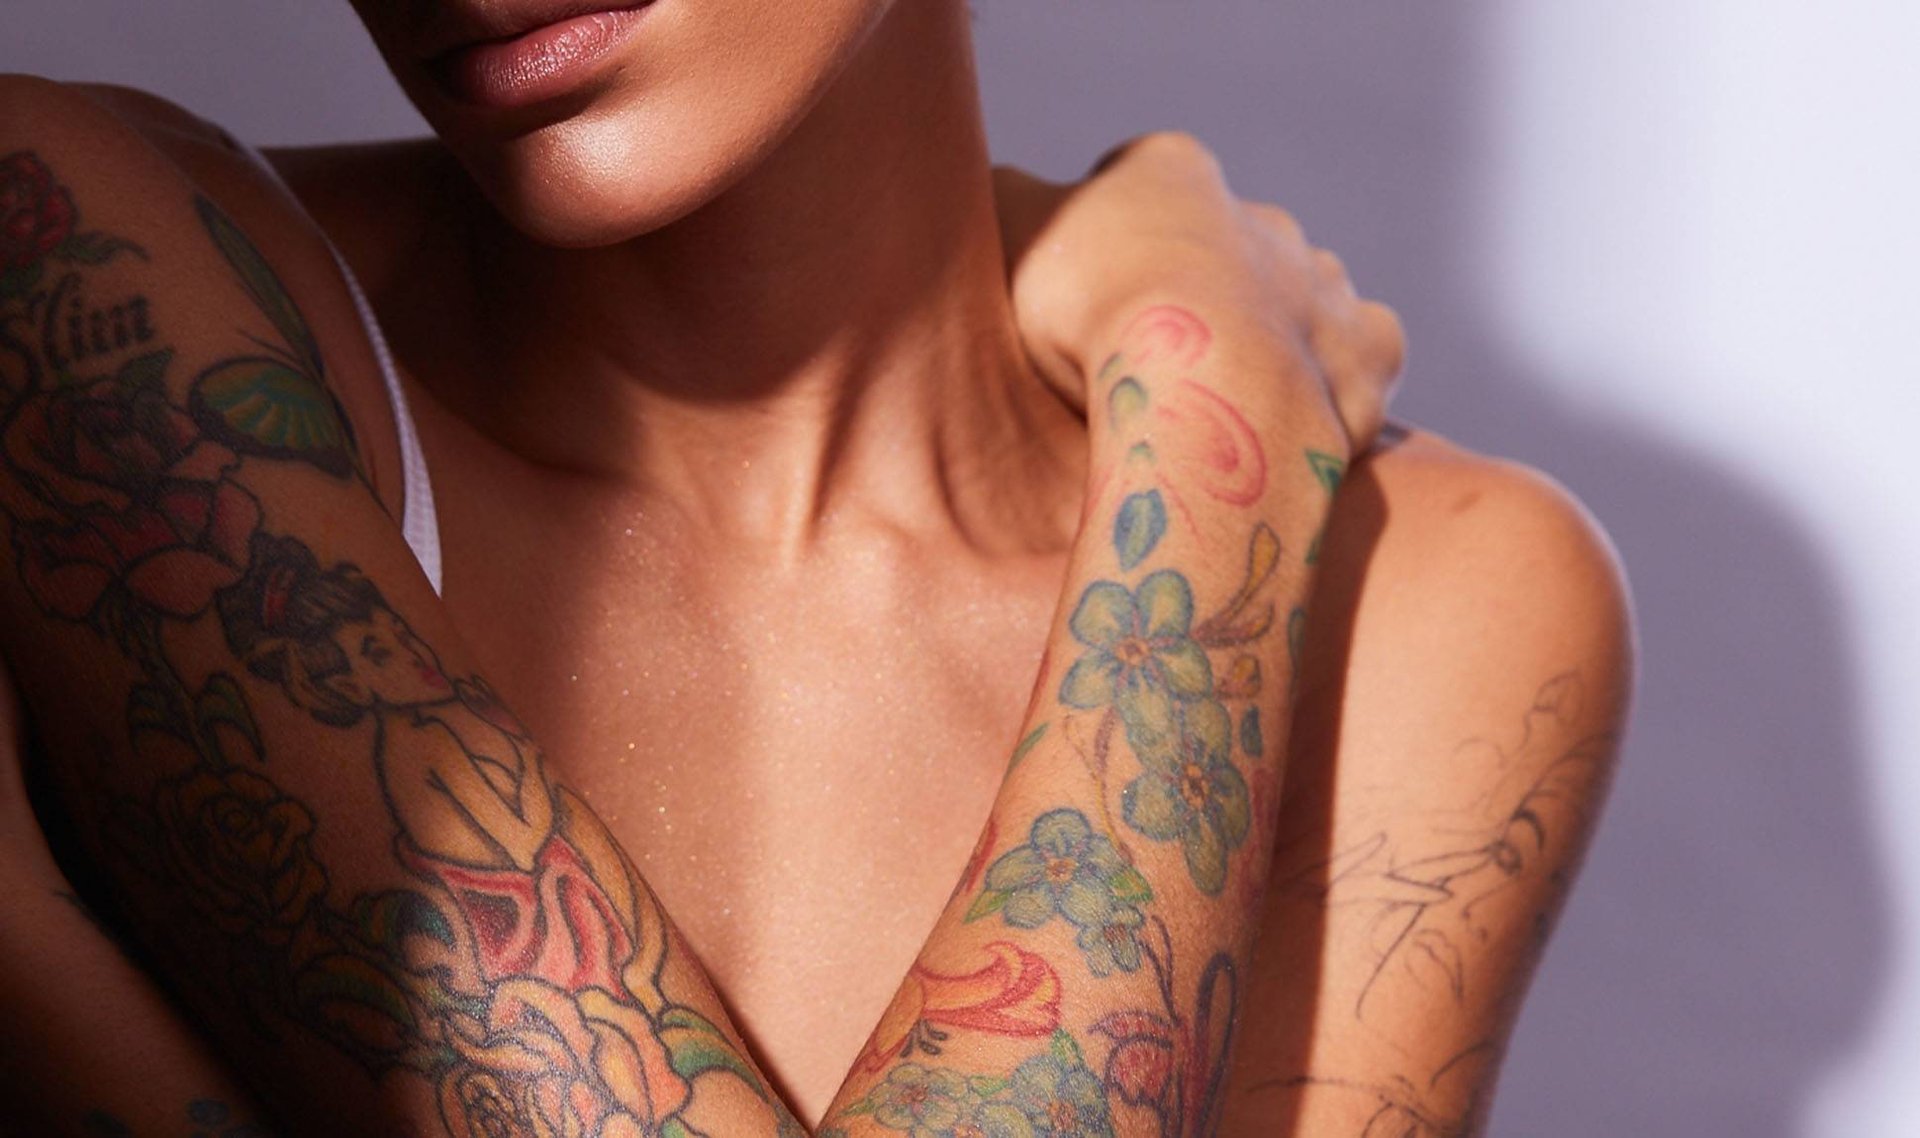 Tattoo Aftercare Mistakes The Dangers of Excessive Aquaphor Use